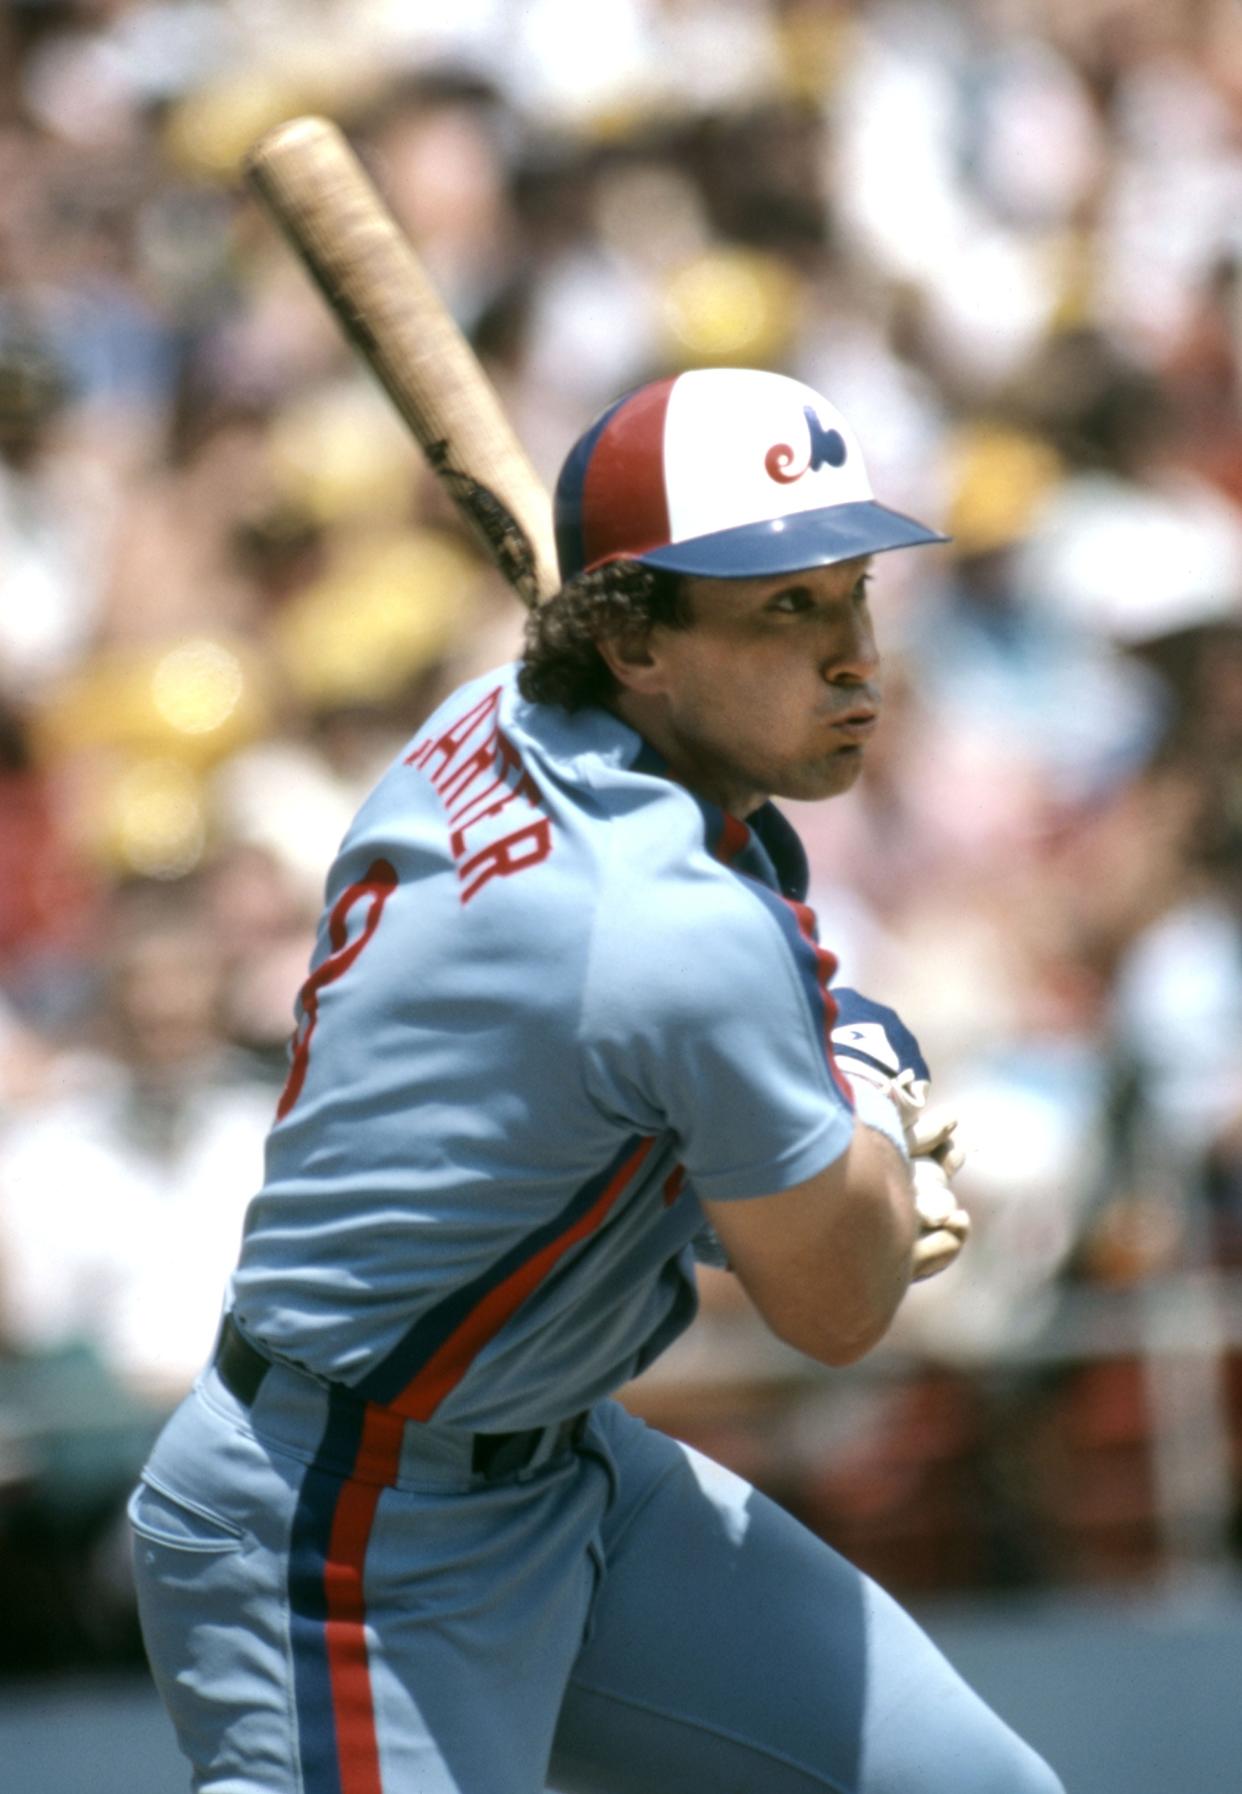 Aug 1983; Pittsburgh, PA, USA; FILE PHOTO; Montreal Expos catcher Gary Carter hits the ball against the Pittsburgh Pirates at Three Rivers Stadium. Mandatory Credit: Malcolm Emmons-USA TODAY Sports